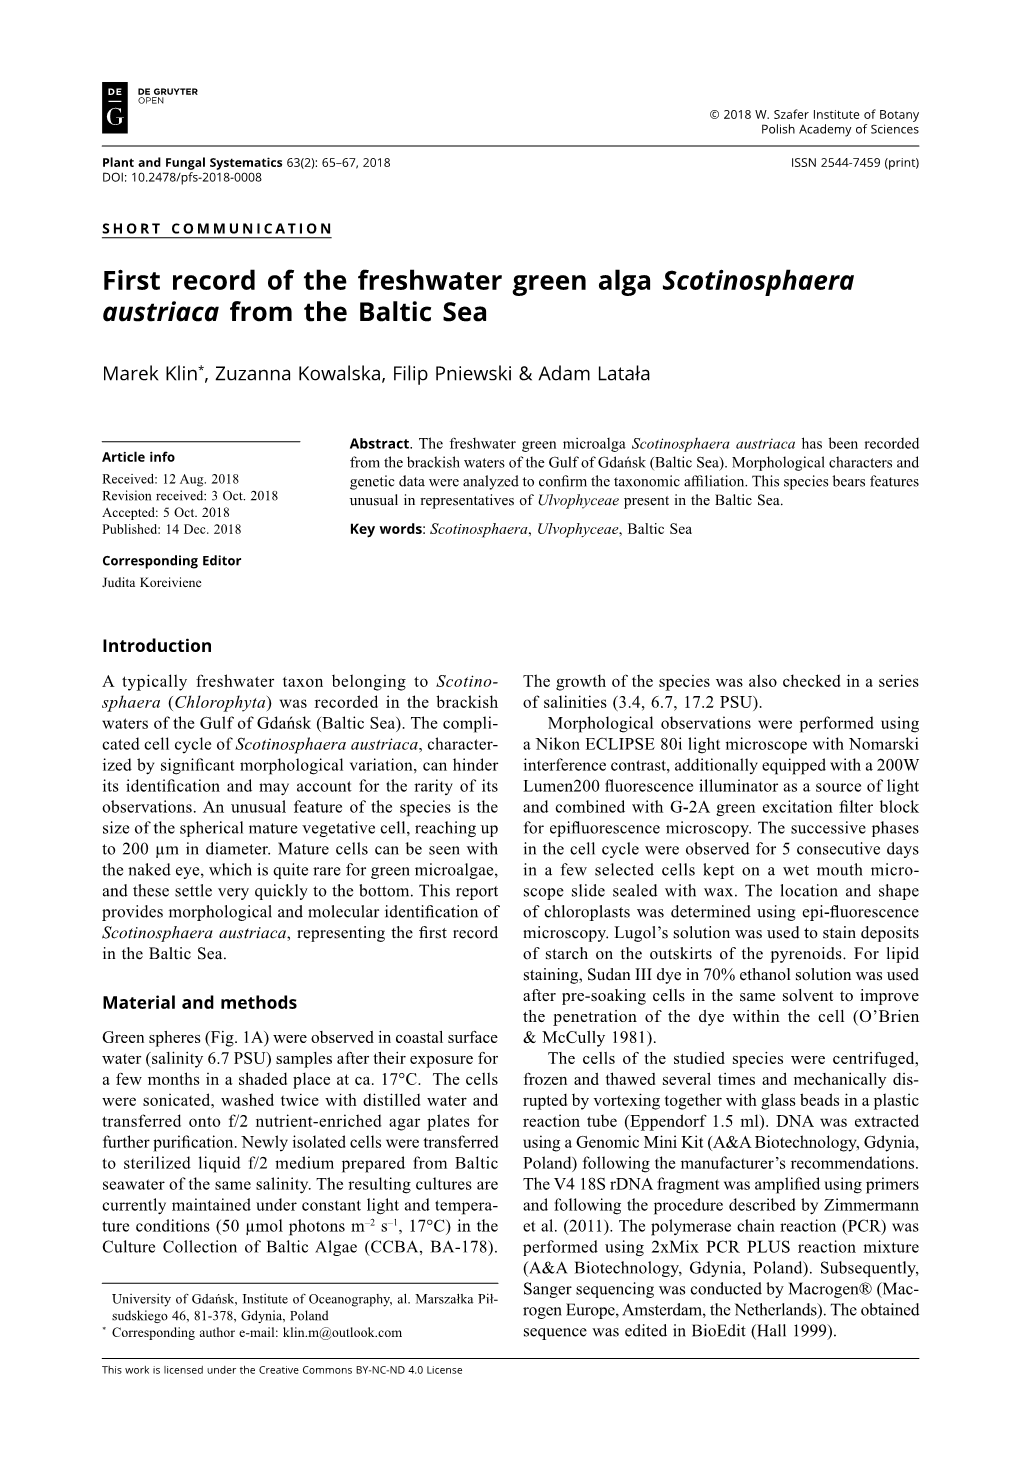 First Record of the Freshwater Green Alga Scotinosphaera Austriaca from the Baltic Sea